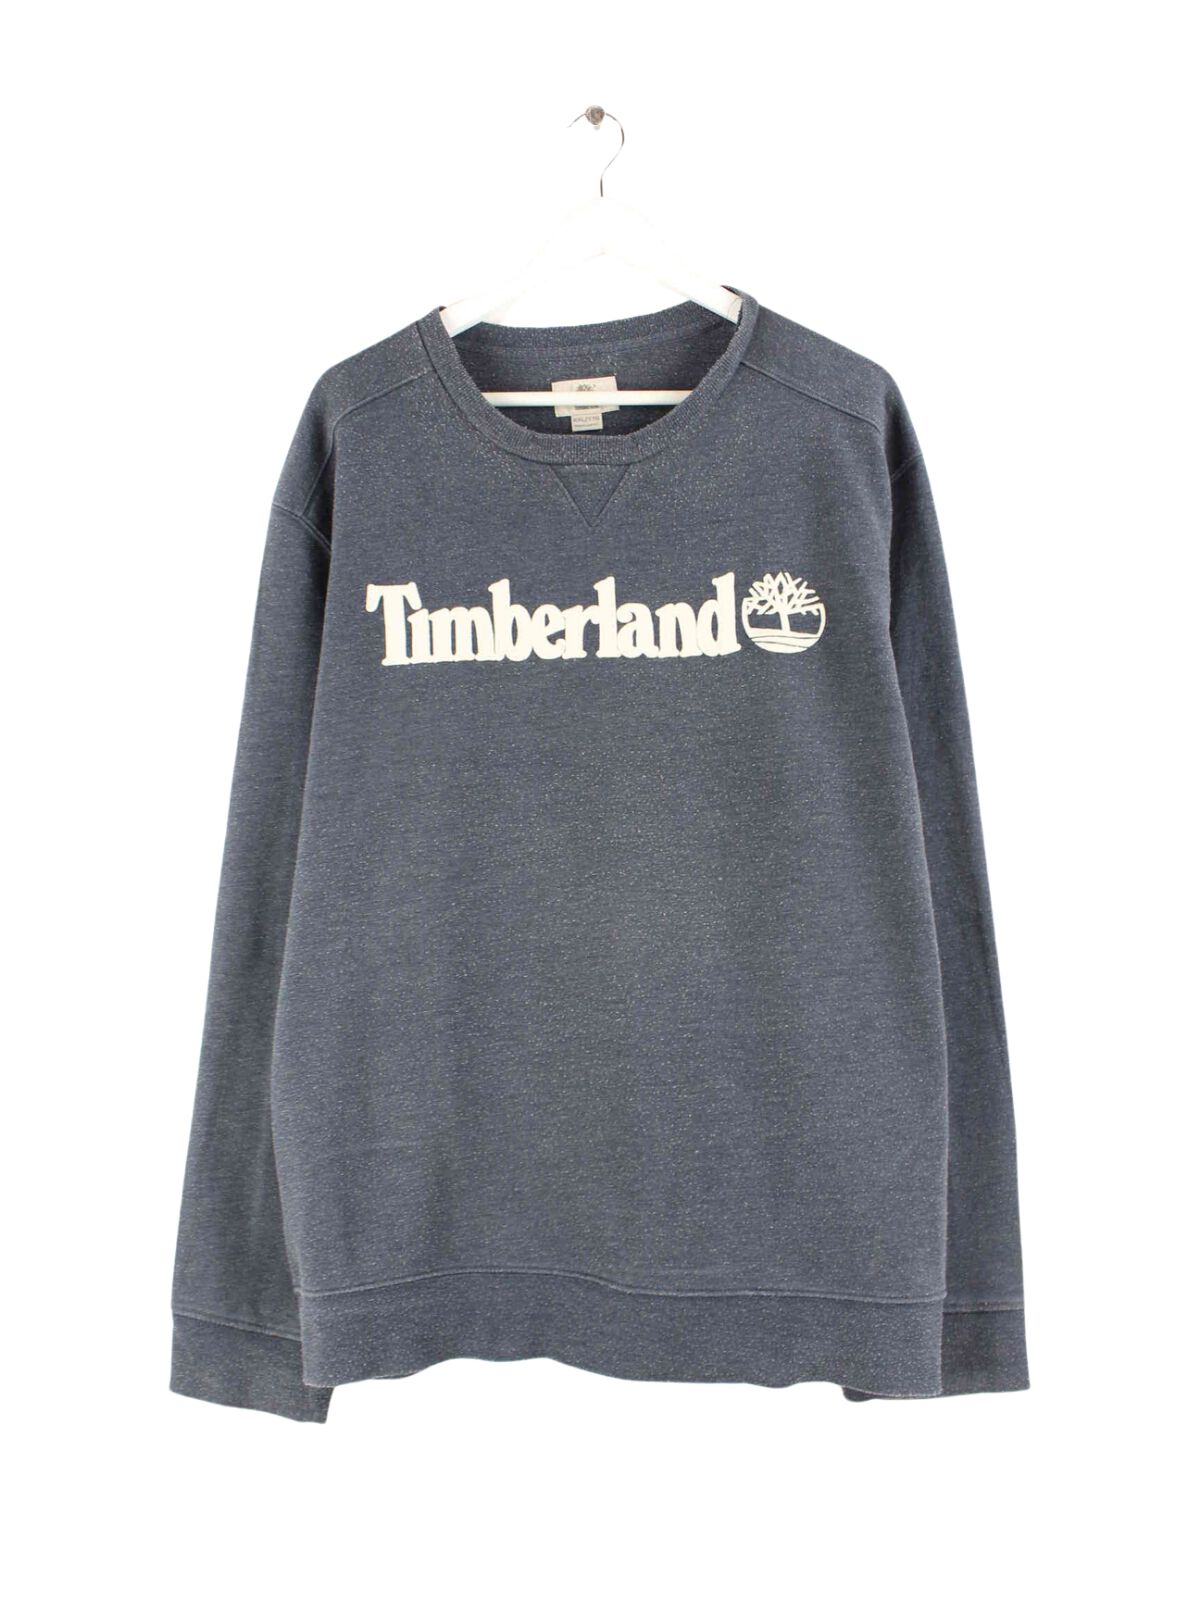 Timberland y2k Embroidered Logo Sweater Grau XXL (front image)